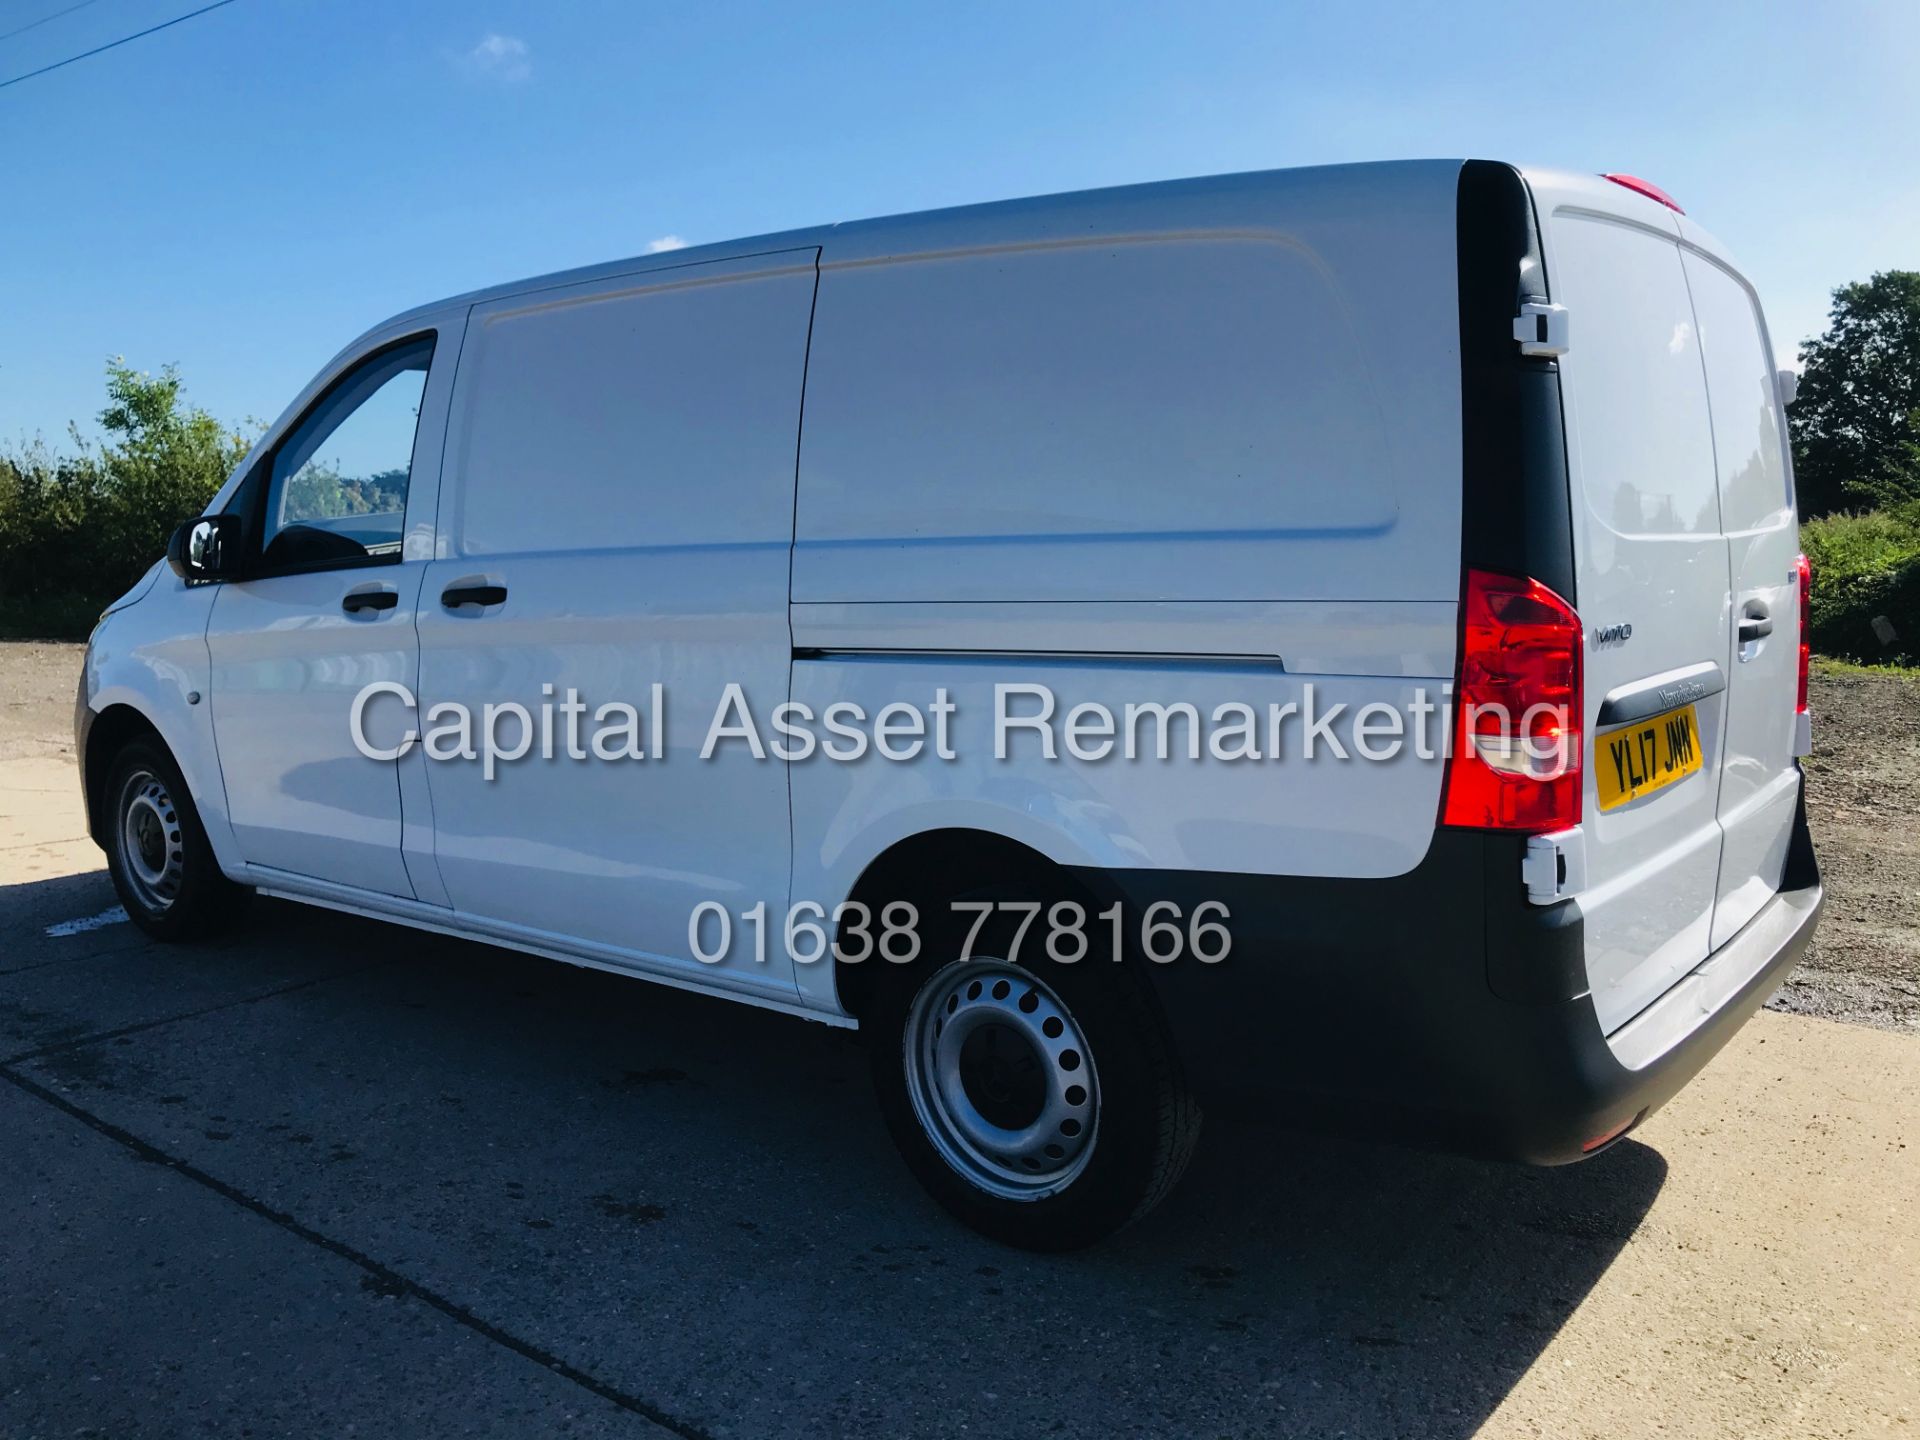 (On Sale) MERCEDES VITO 109CDI (17 REG) 1 OWNER - LOW MILEAGE WITH FSH *EURO 6 / ULEZ COMPLIANT* - Image 9 of 24